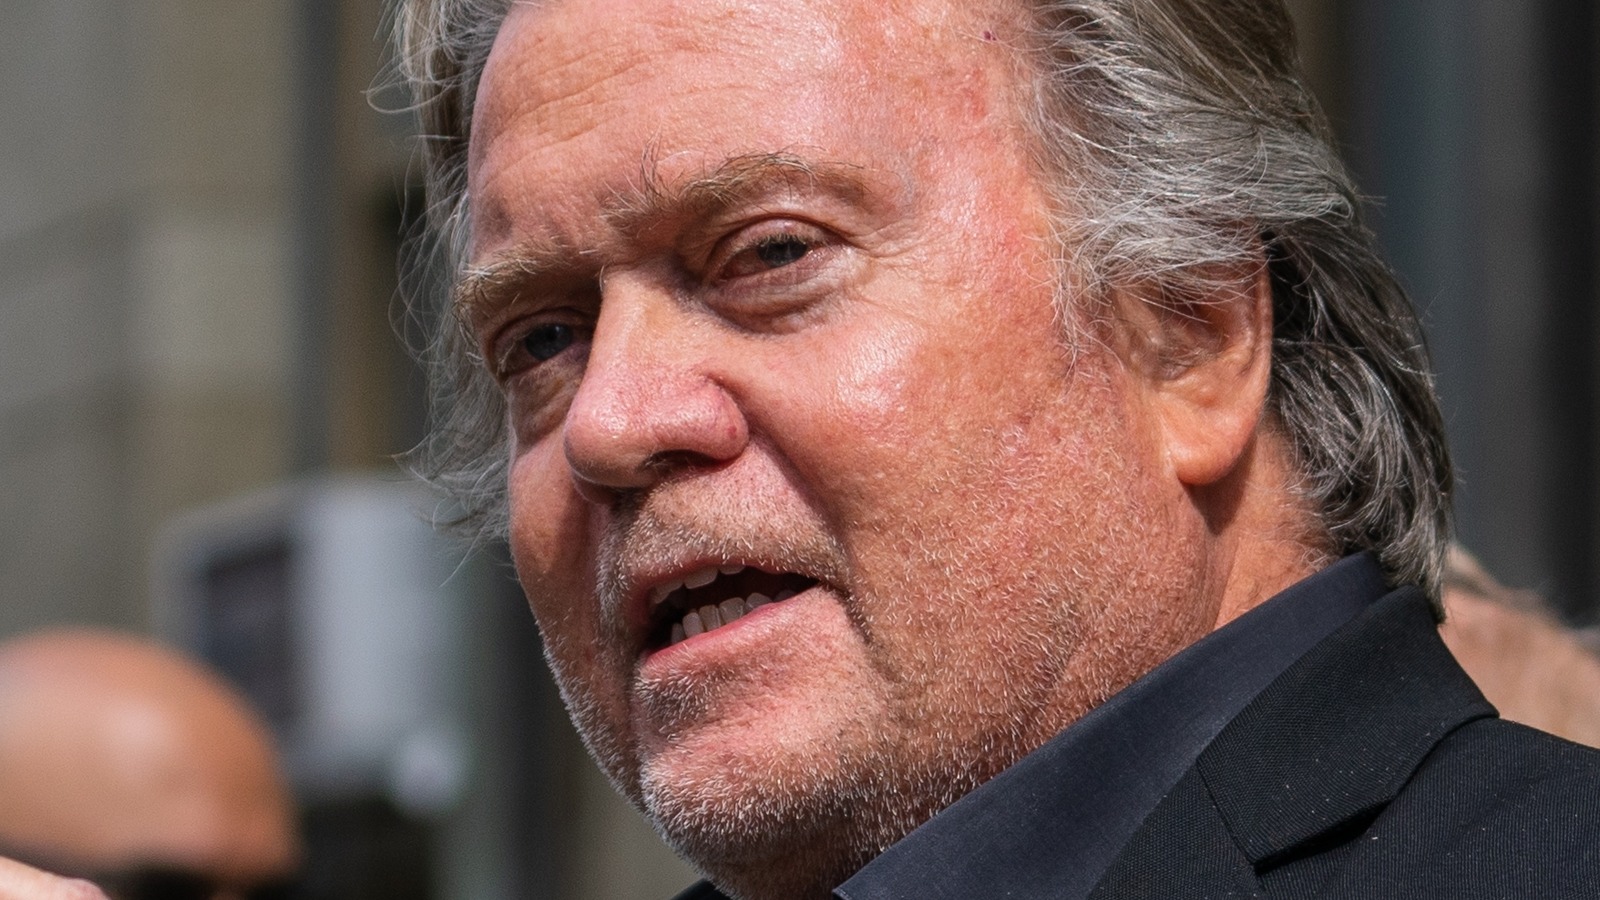 How Steve Bannon's Political Views Were Influenced By Jimmy Carter